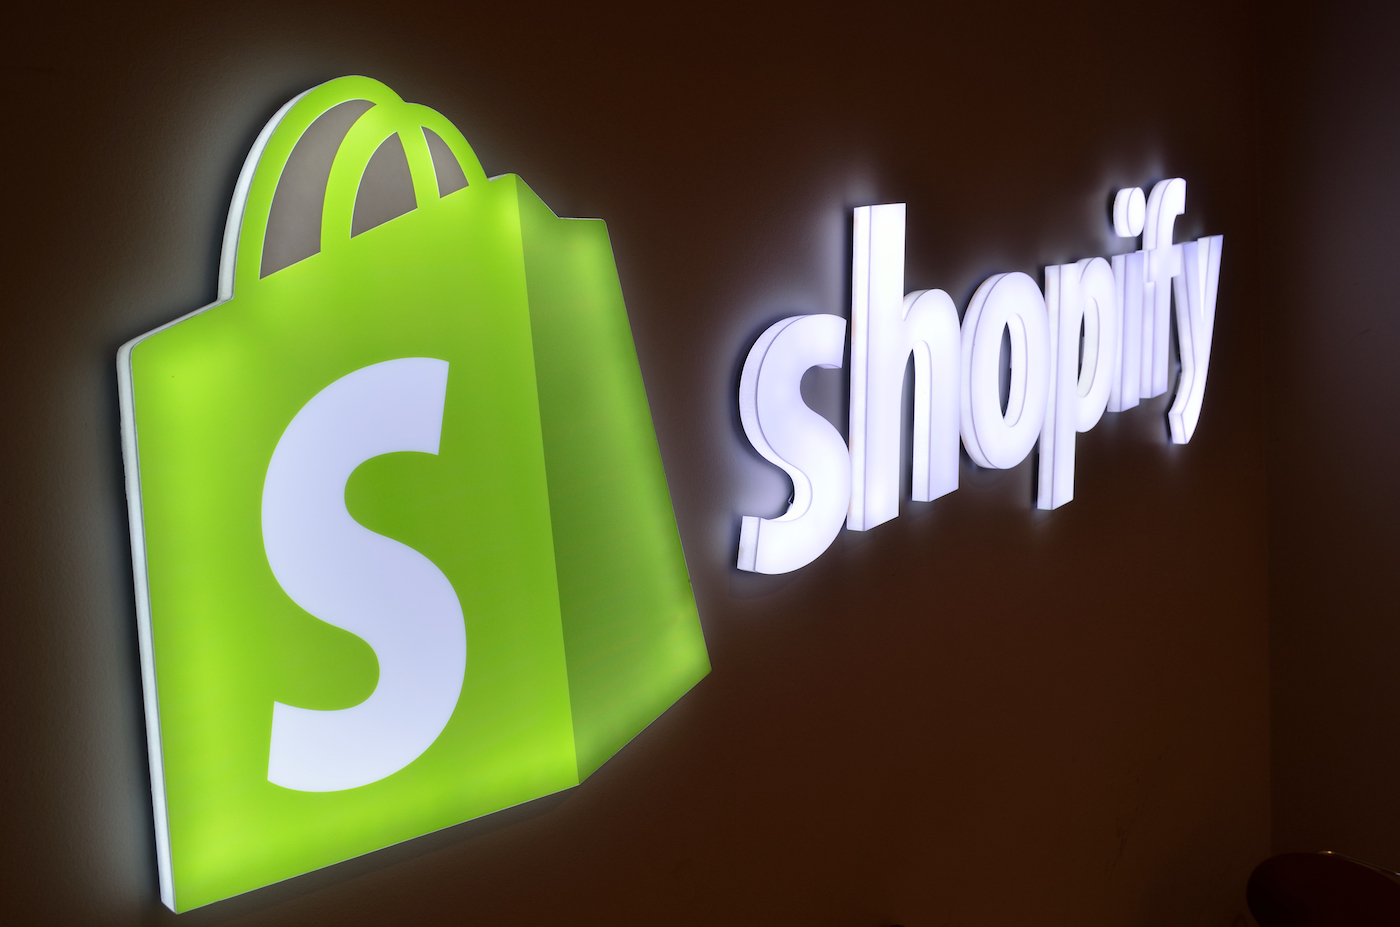 Shopify aims to woo larger clients with a new stack for enterprise retail